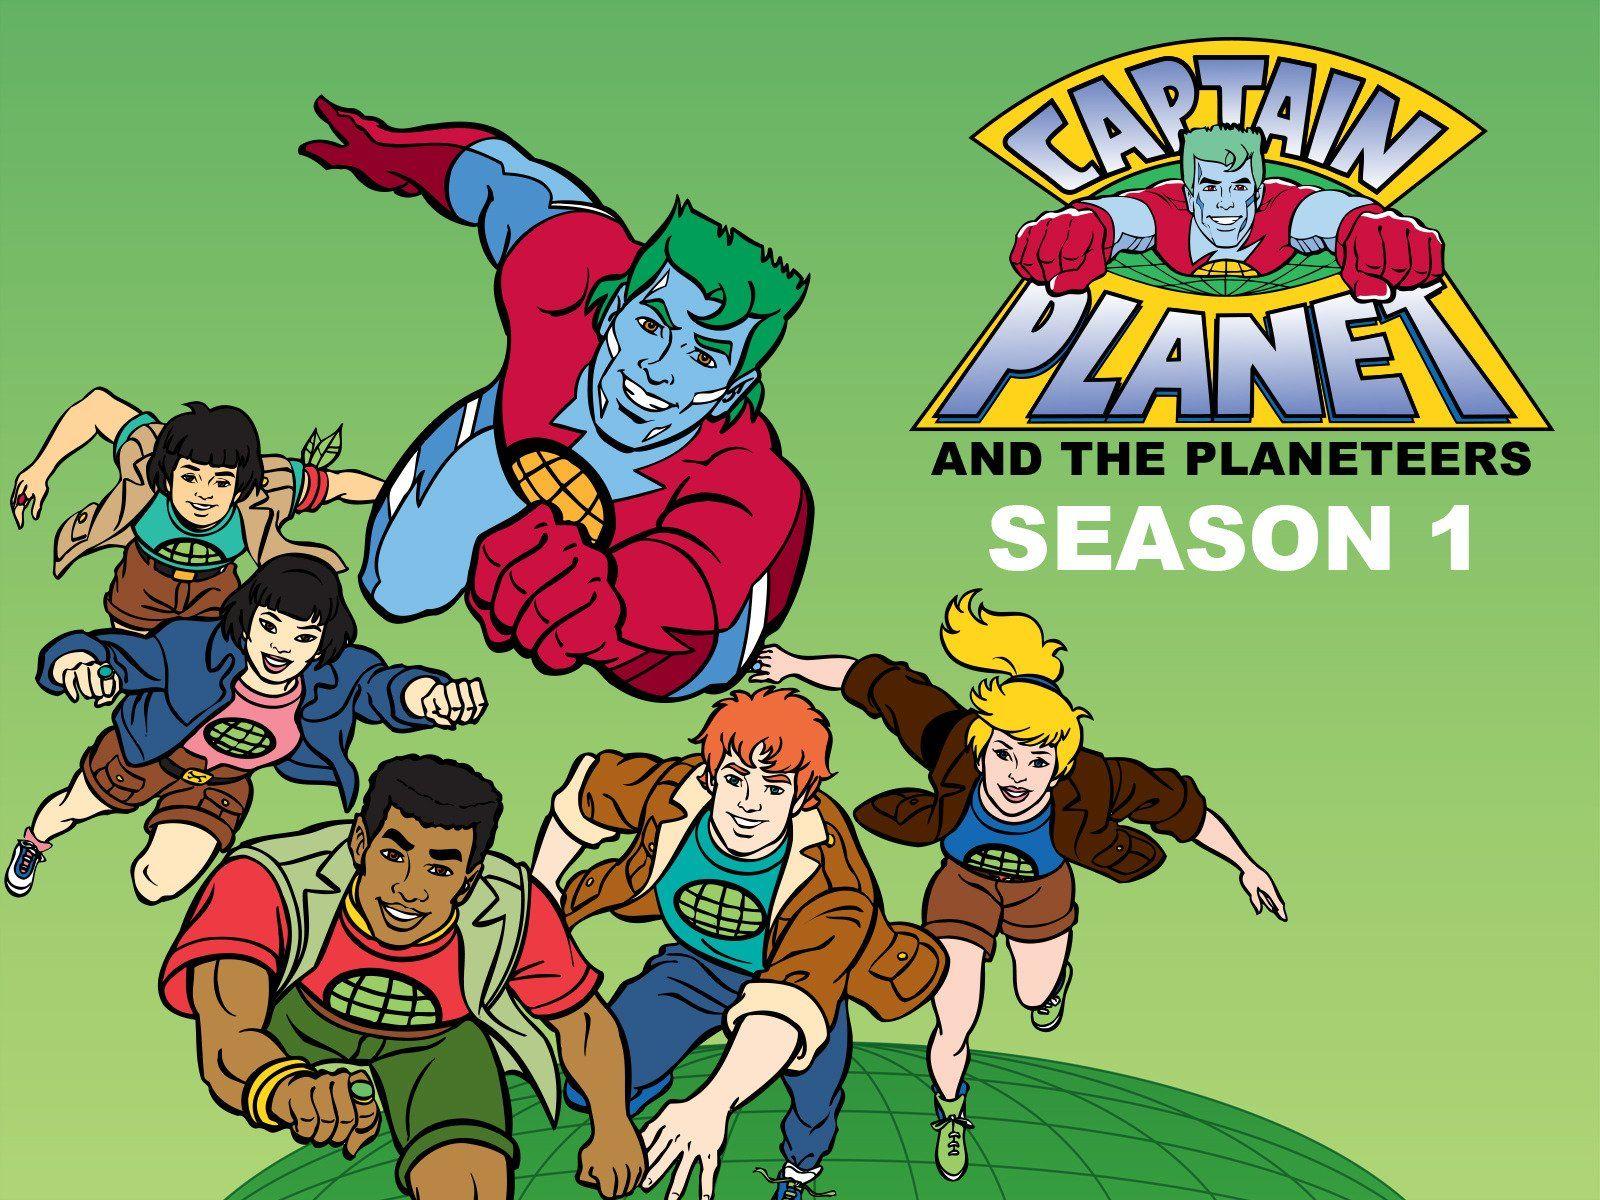 Captain Planet and the Planeteers Season 1: Amazon